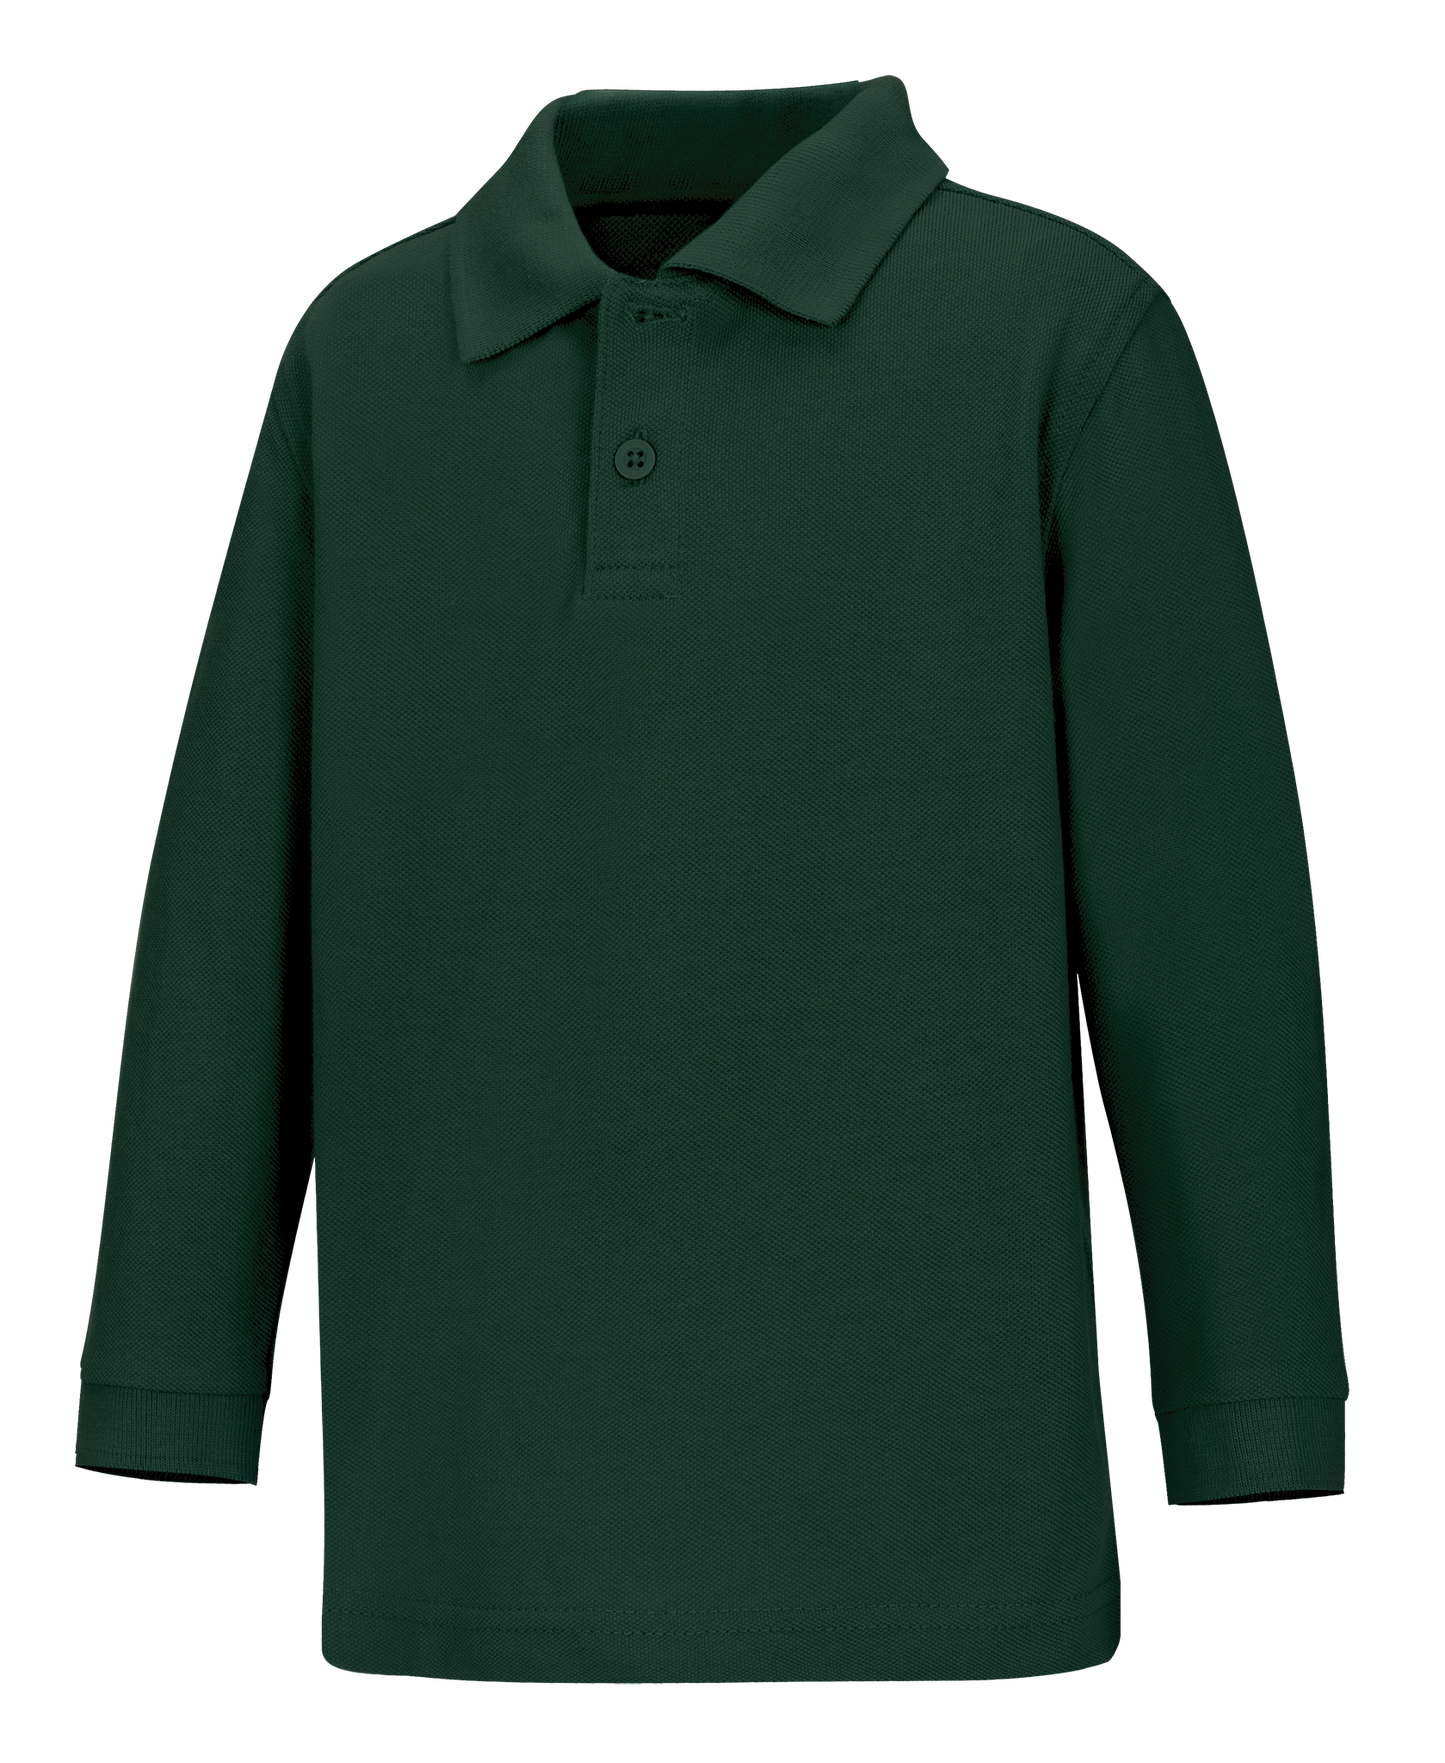 Old Fit Toddler Long Sleeve Pique Polo